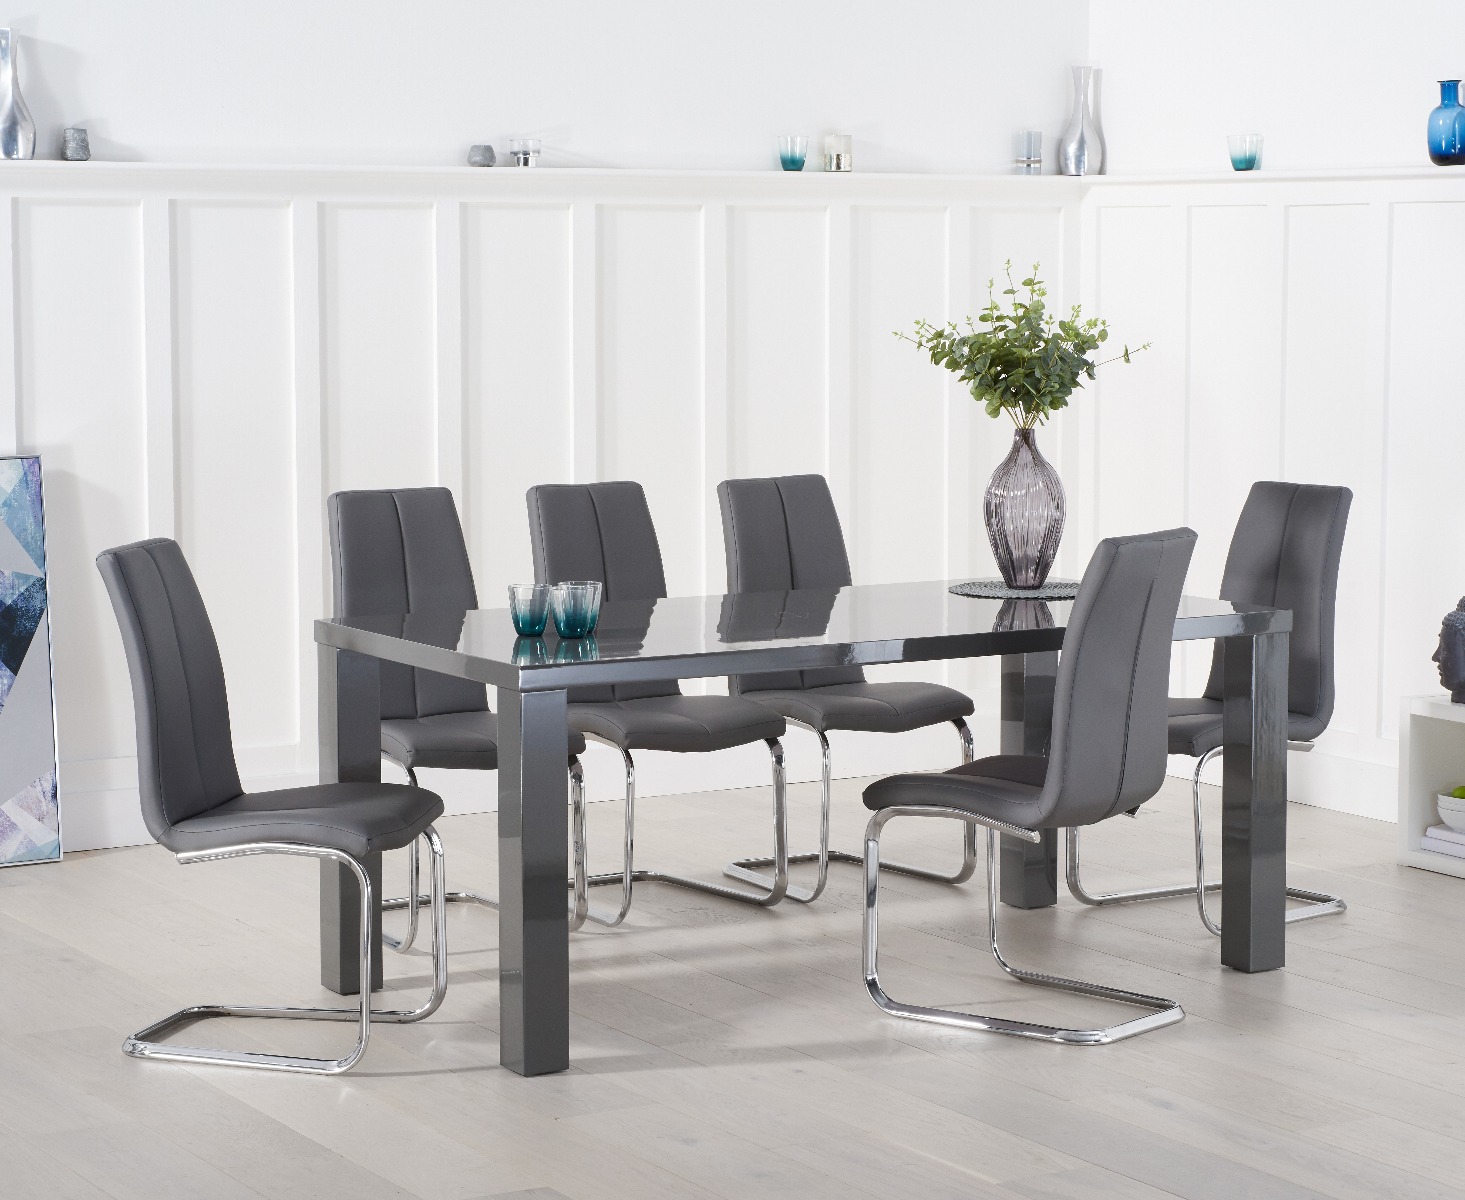 Photo 1 of Atlanta 200cm dark grey high gloss dining table with 8 grey gianni chairs